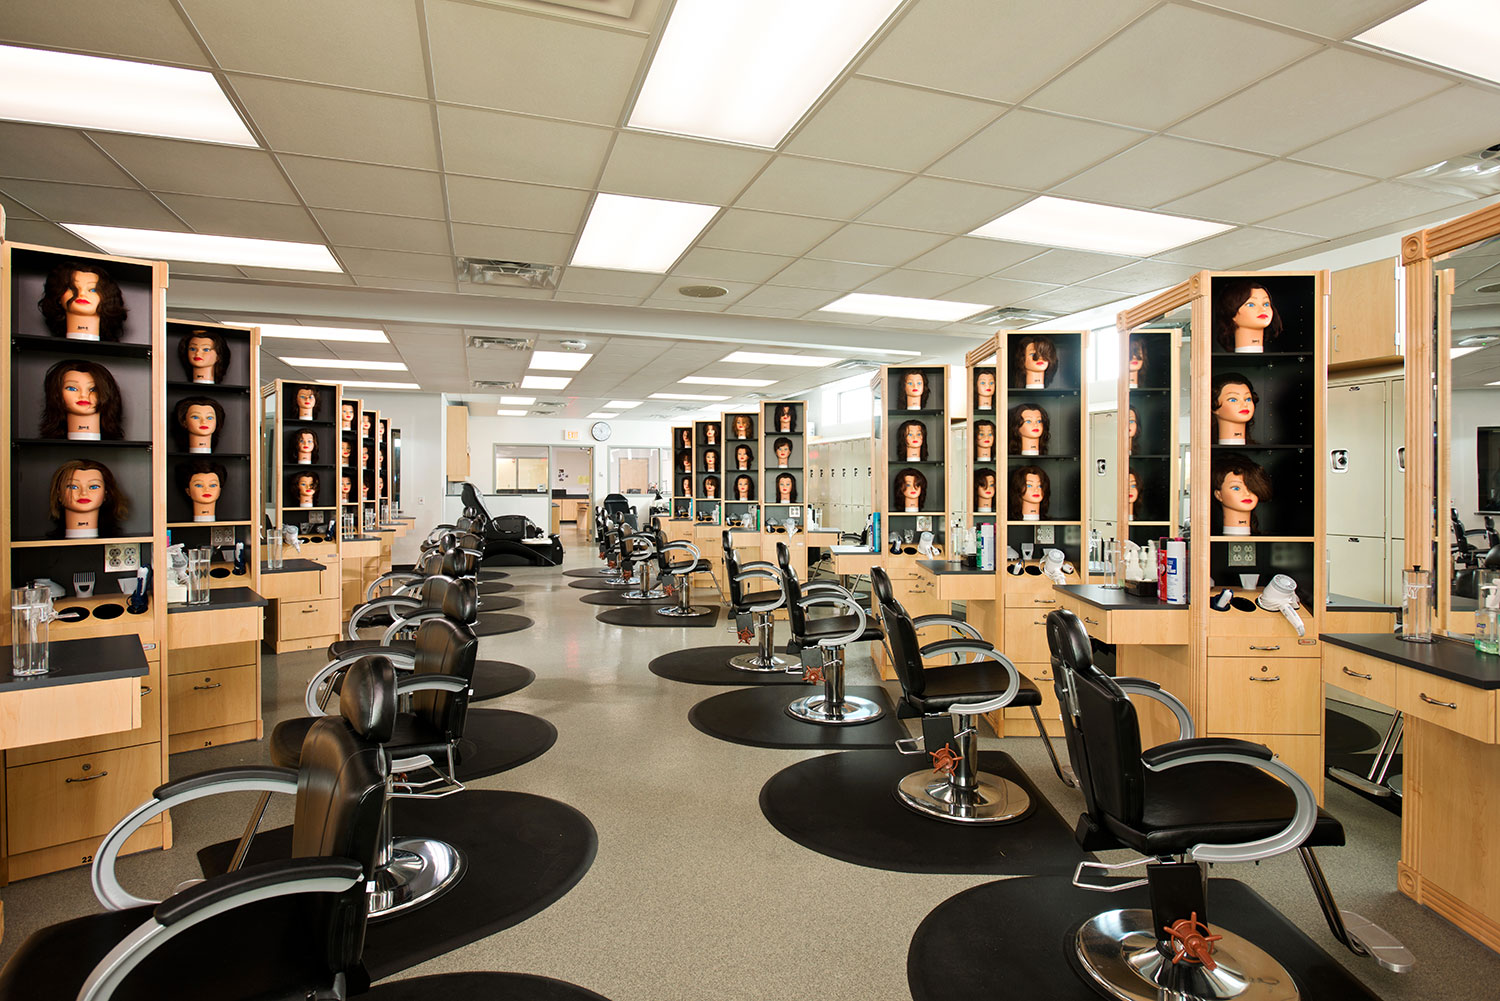 Multi-occupational teaching areas design by Mosaic for CiTi BOCES include a teaching salon.